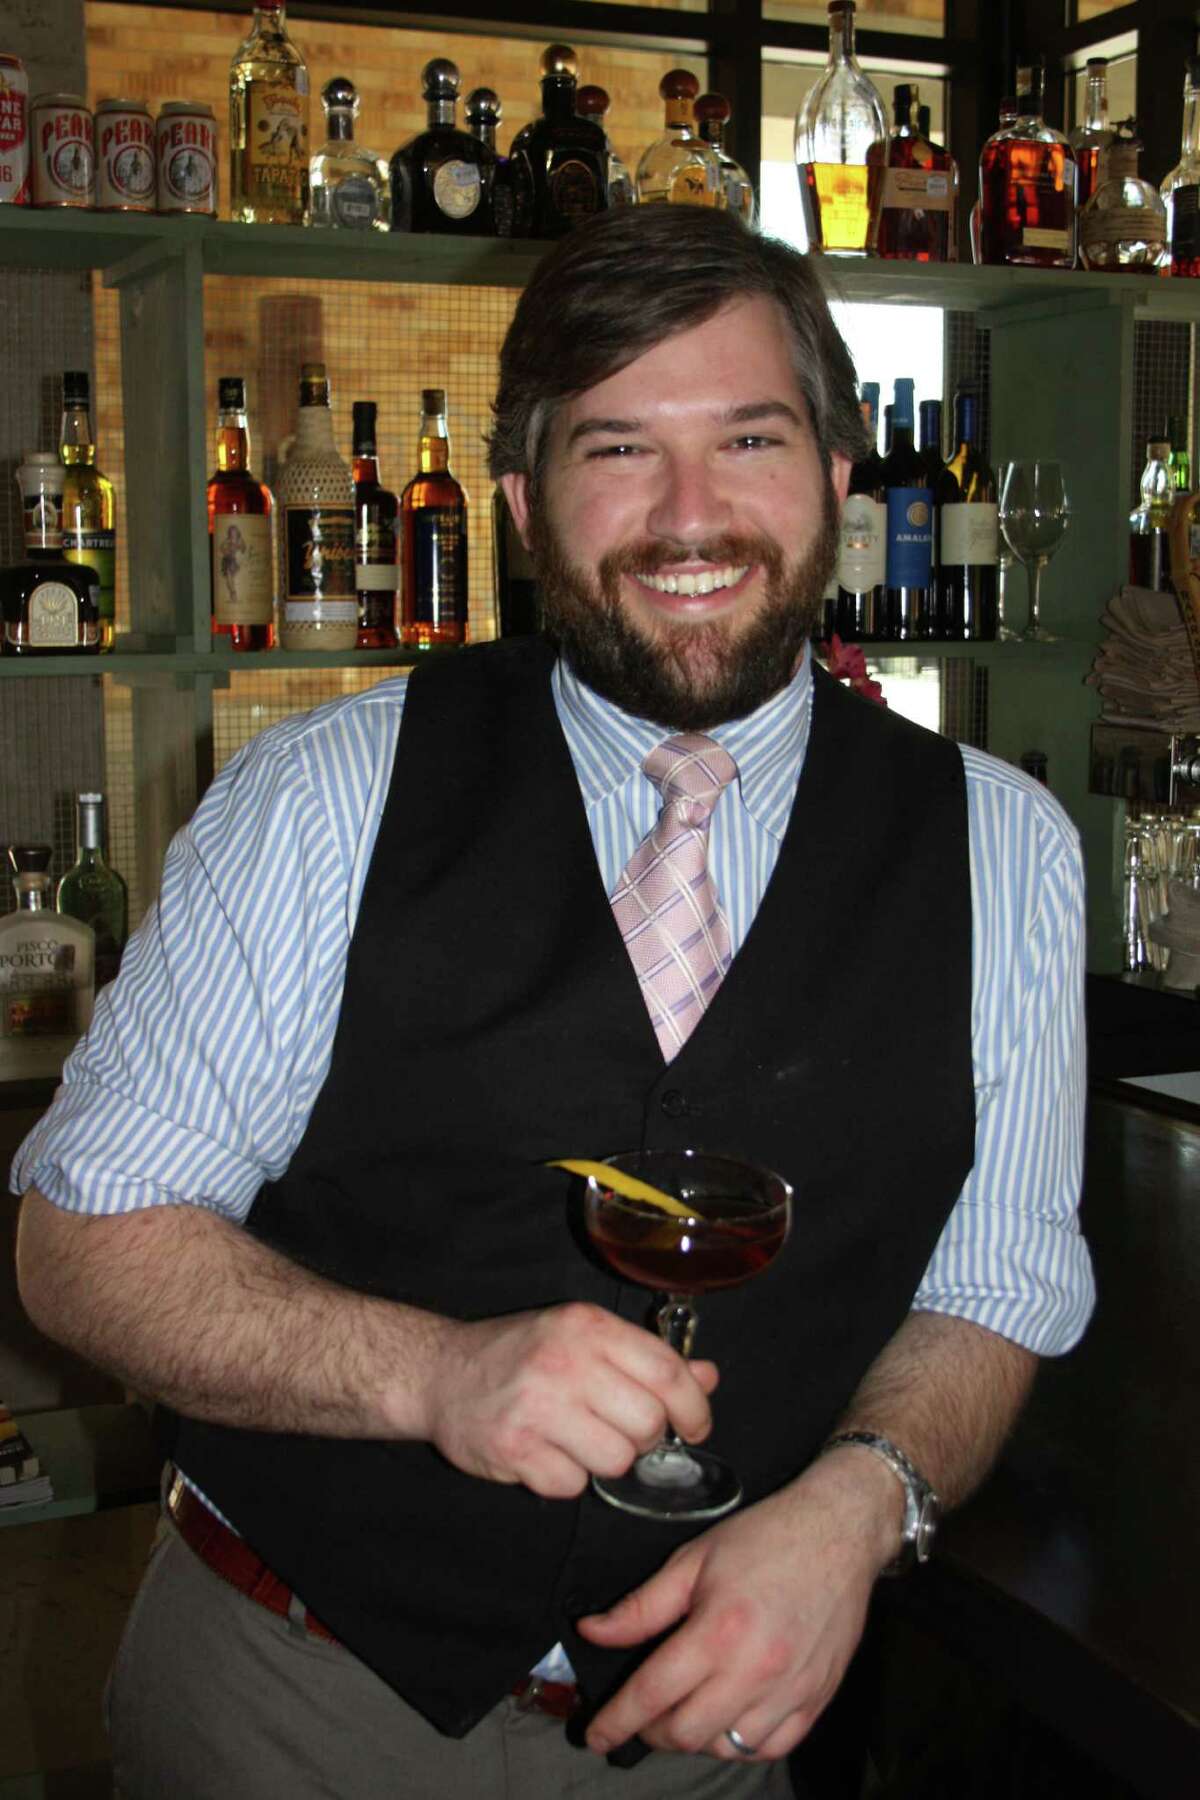 Chris Ware is the bar manager at Arcade Midtown Kitchen. Read more